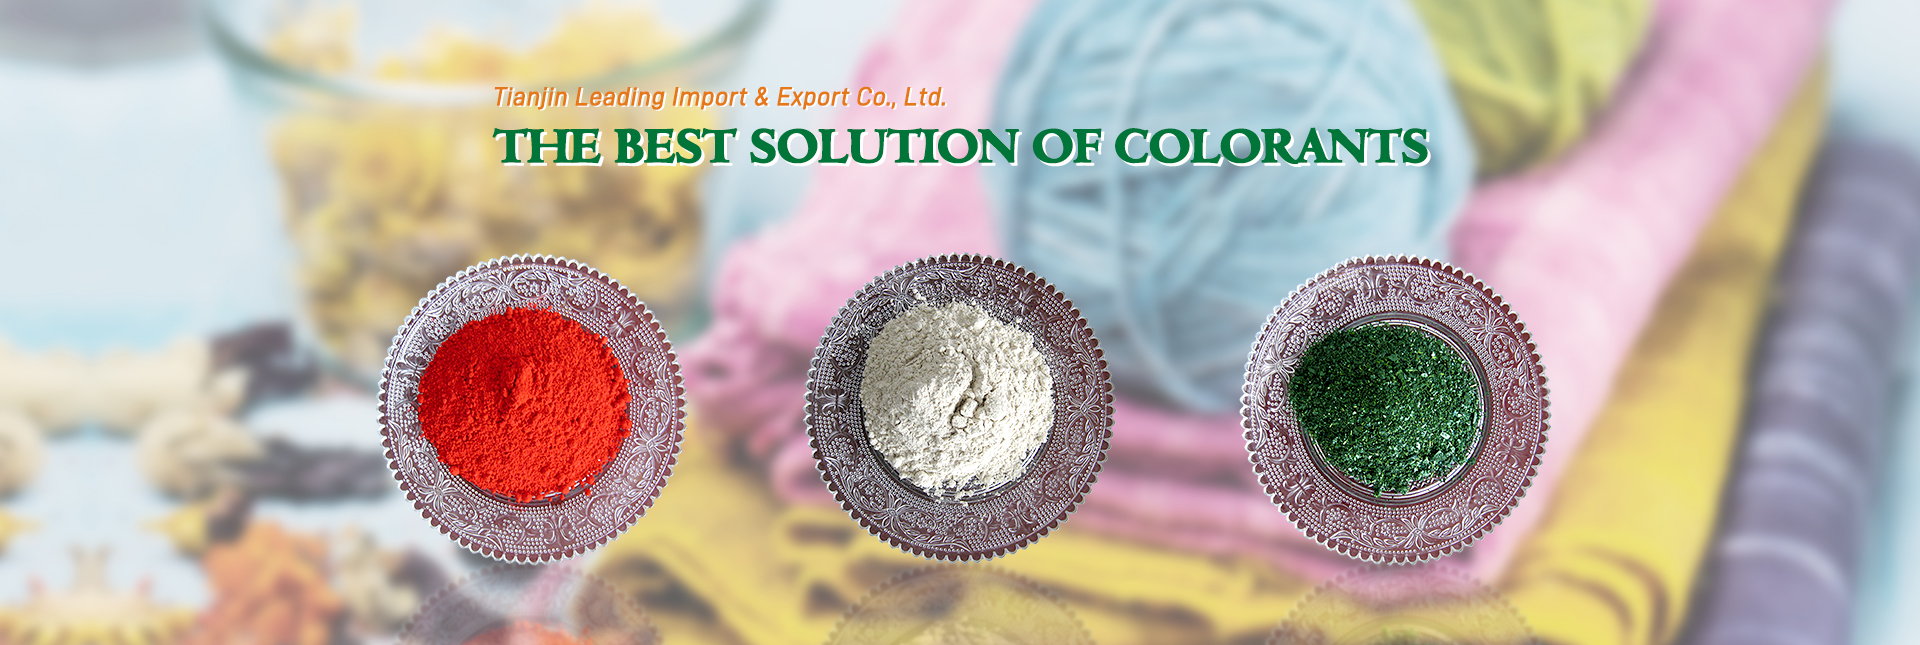 The Best Solution of Colorants